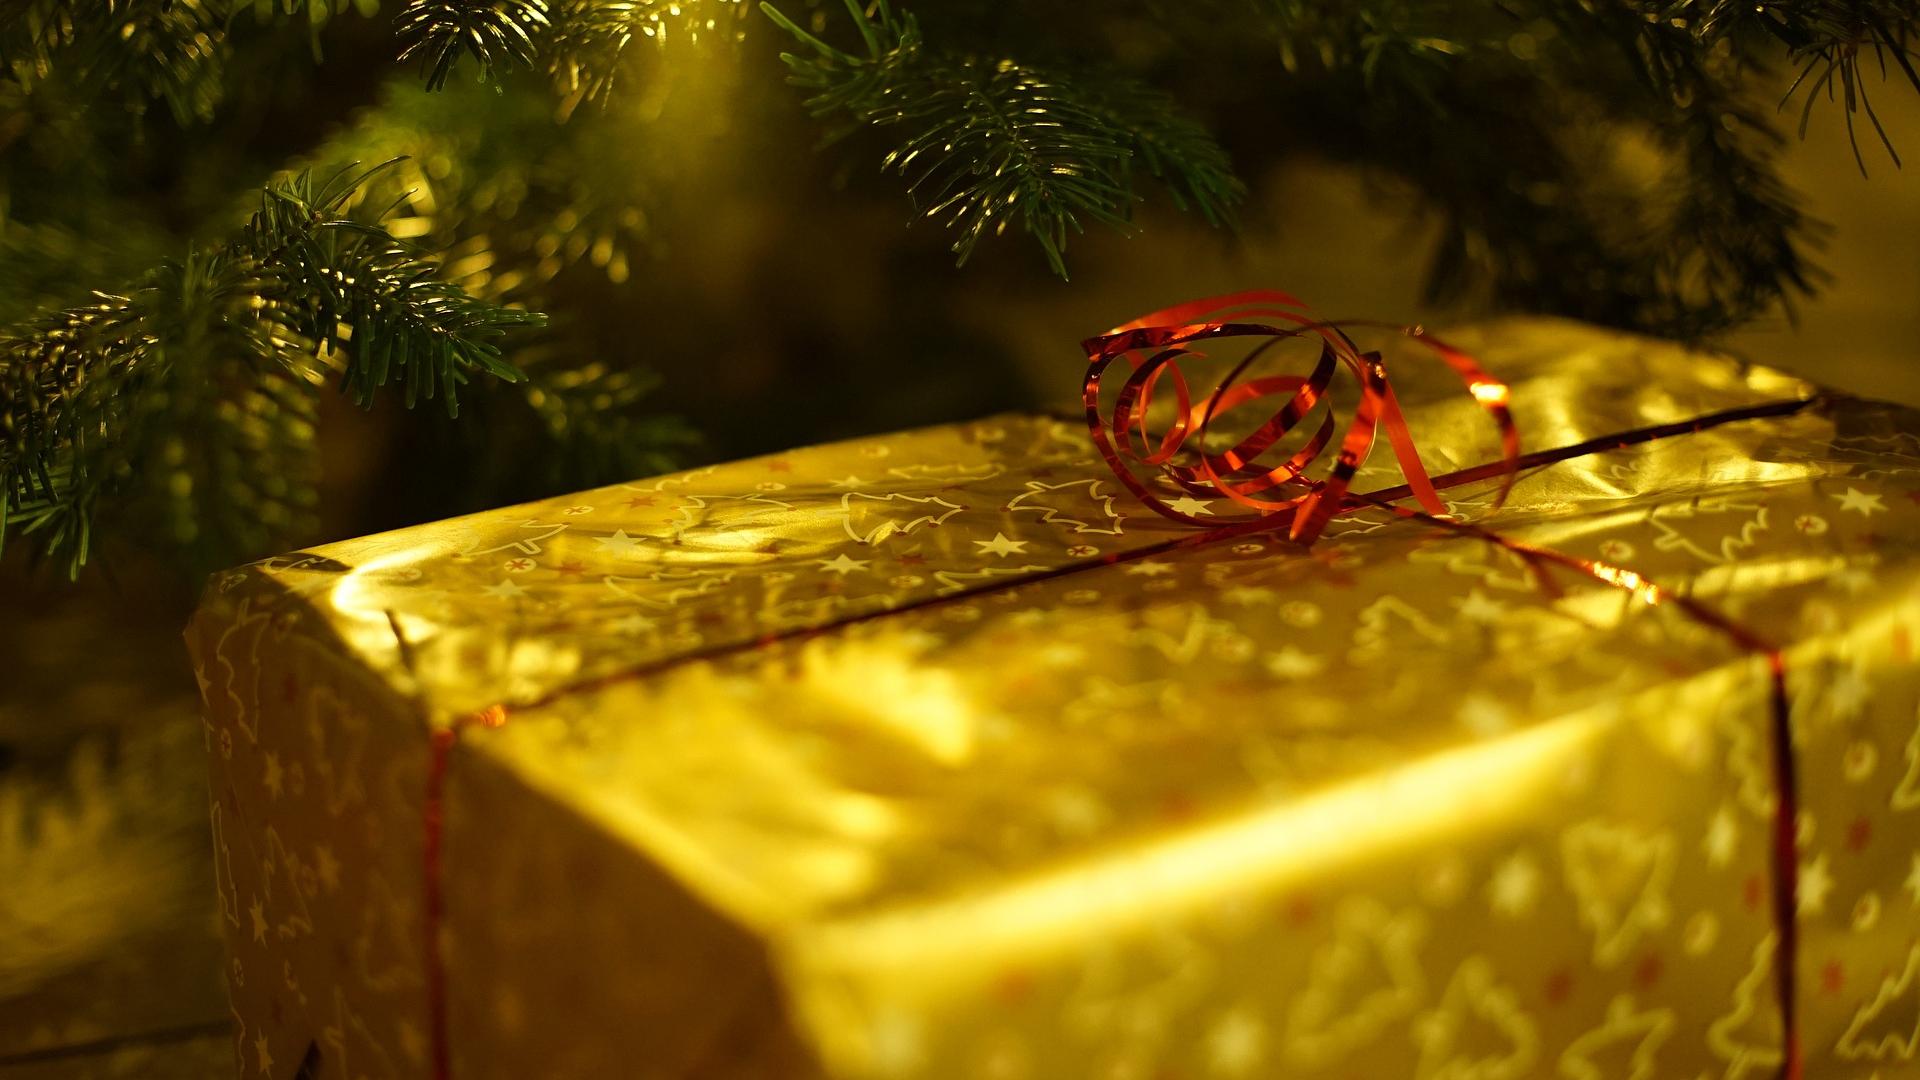 A Christmas gift wrapped in gold paper beneath a Christmas tree